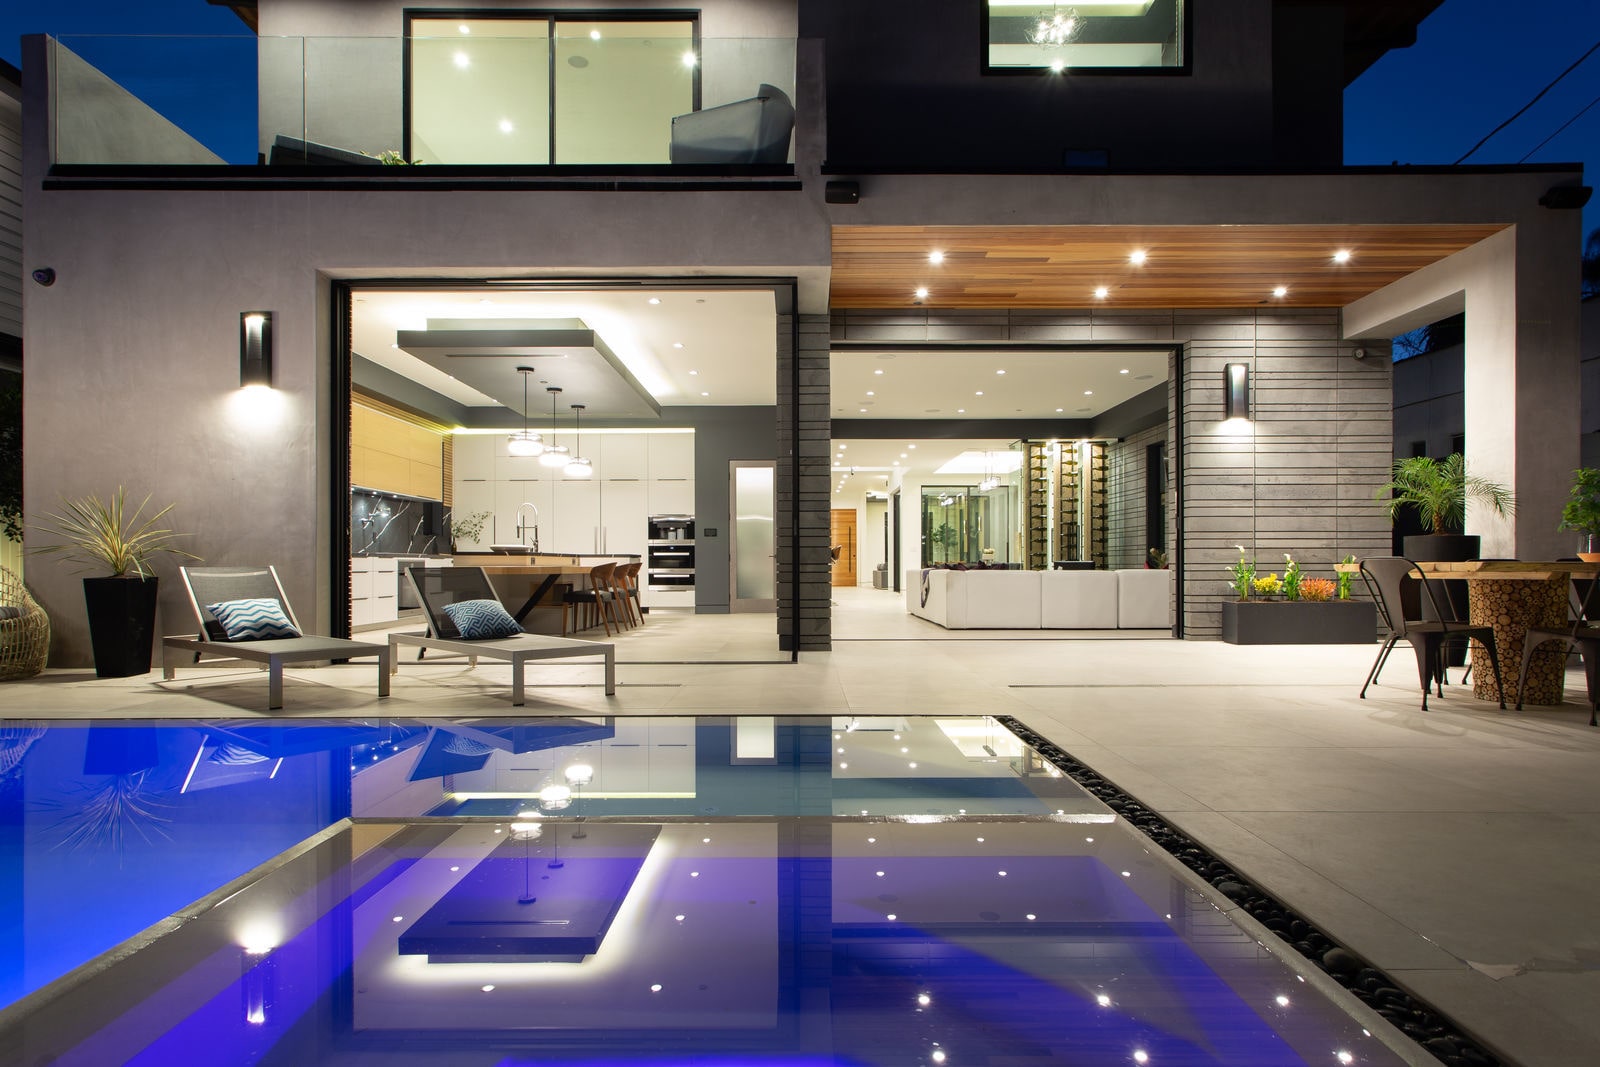 Norstone Platinum Planc Large Format Tile on the rear facade of a modern California home with edgeless pool